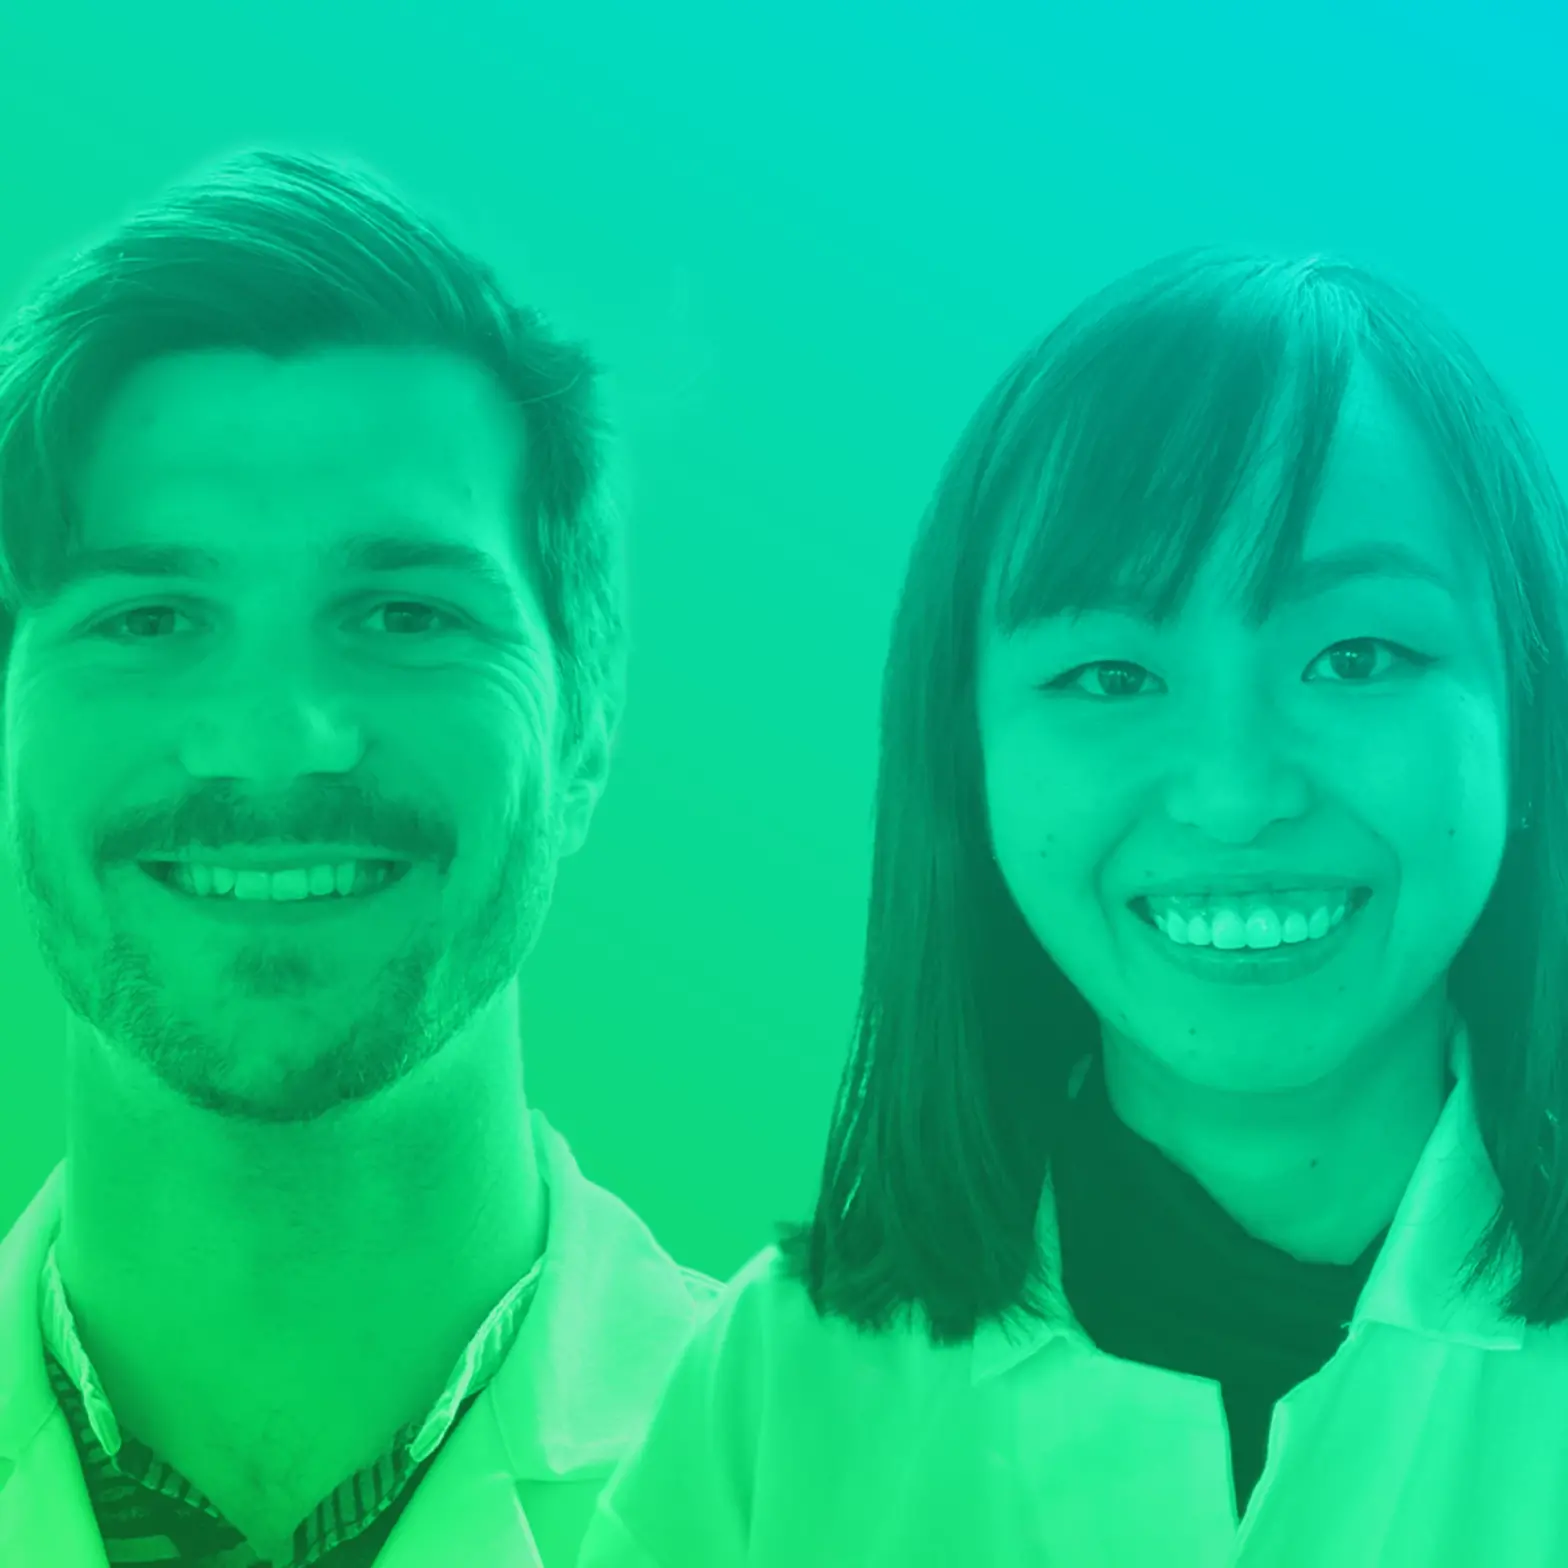 Imran House and Junyun Lai featured on the Synthego CRISPR cuts Podcast